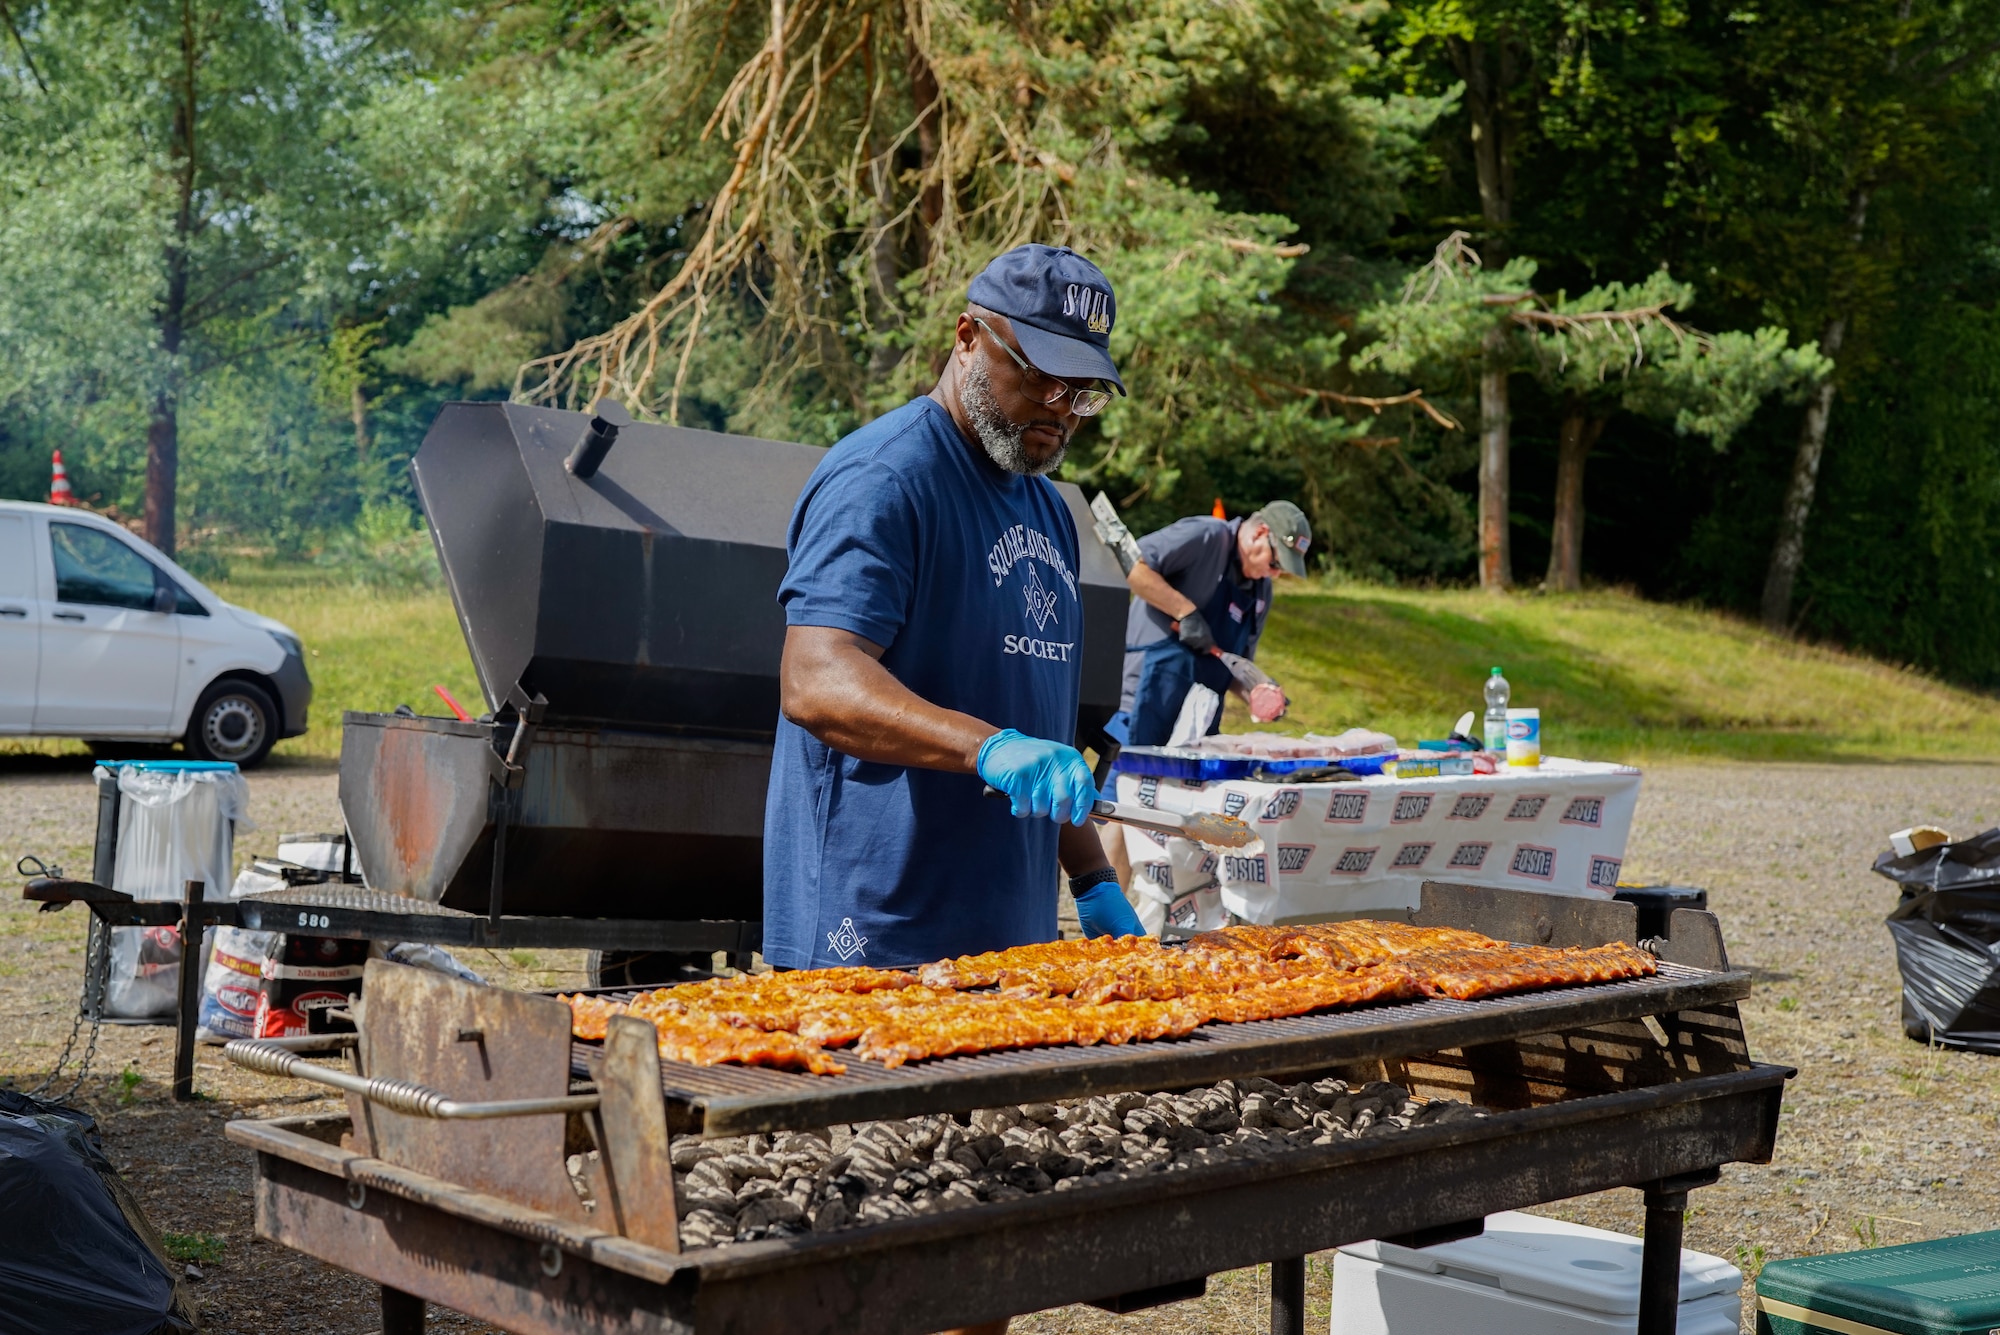 Volunteers prepare food at the Kaiserslautern Military Community’s second annual Juneteenth celebration at Pulaski Barracks, Germany, June 18, 2022. The event was hosted by the African-American Heritage Committee and included a kid zone, dominoes tournament and educational speakers. (U.S. Air Force photo by Airman 1st Class Lauren Jacoby)